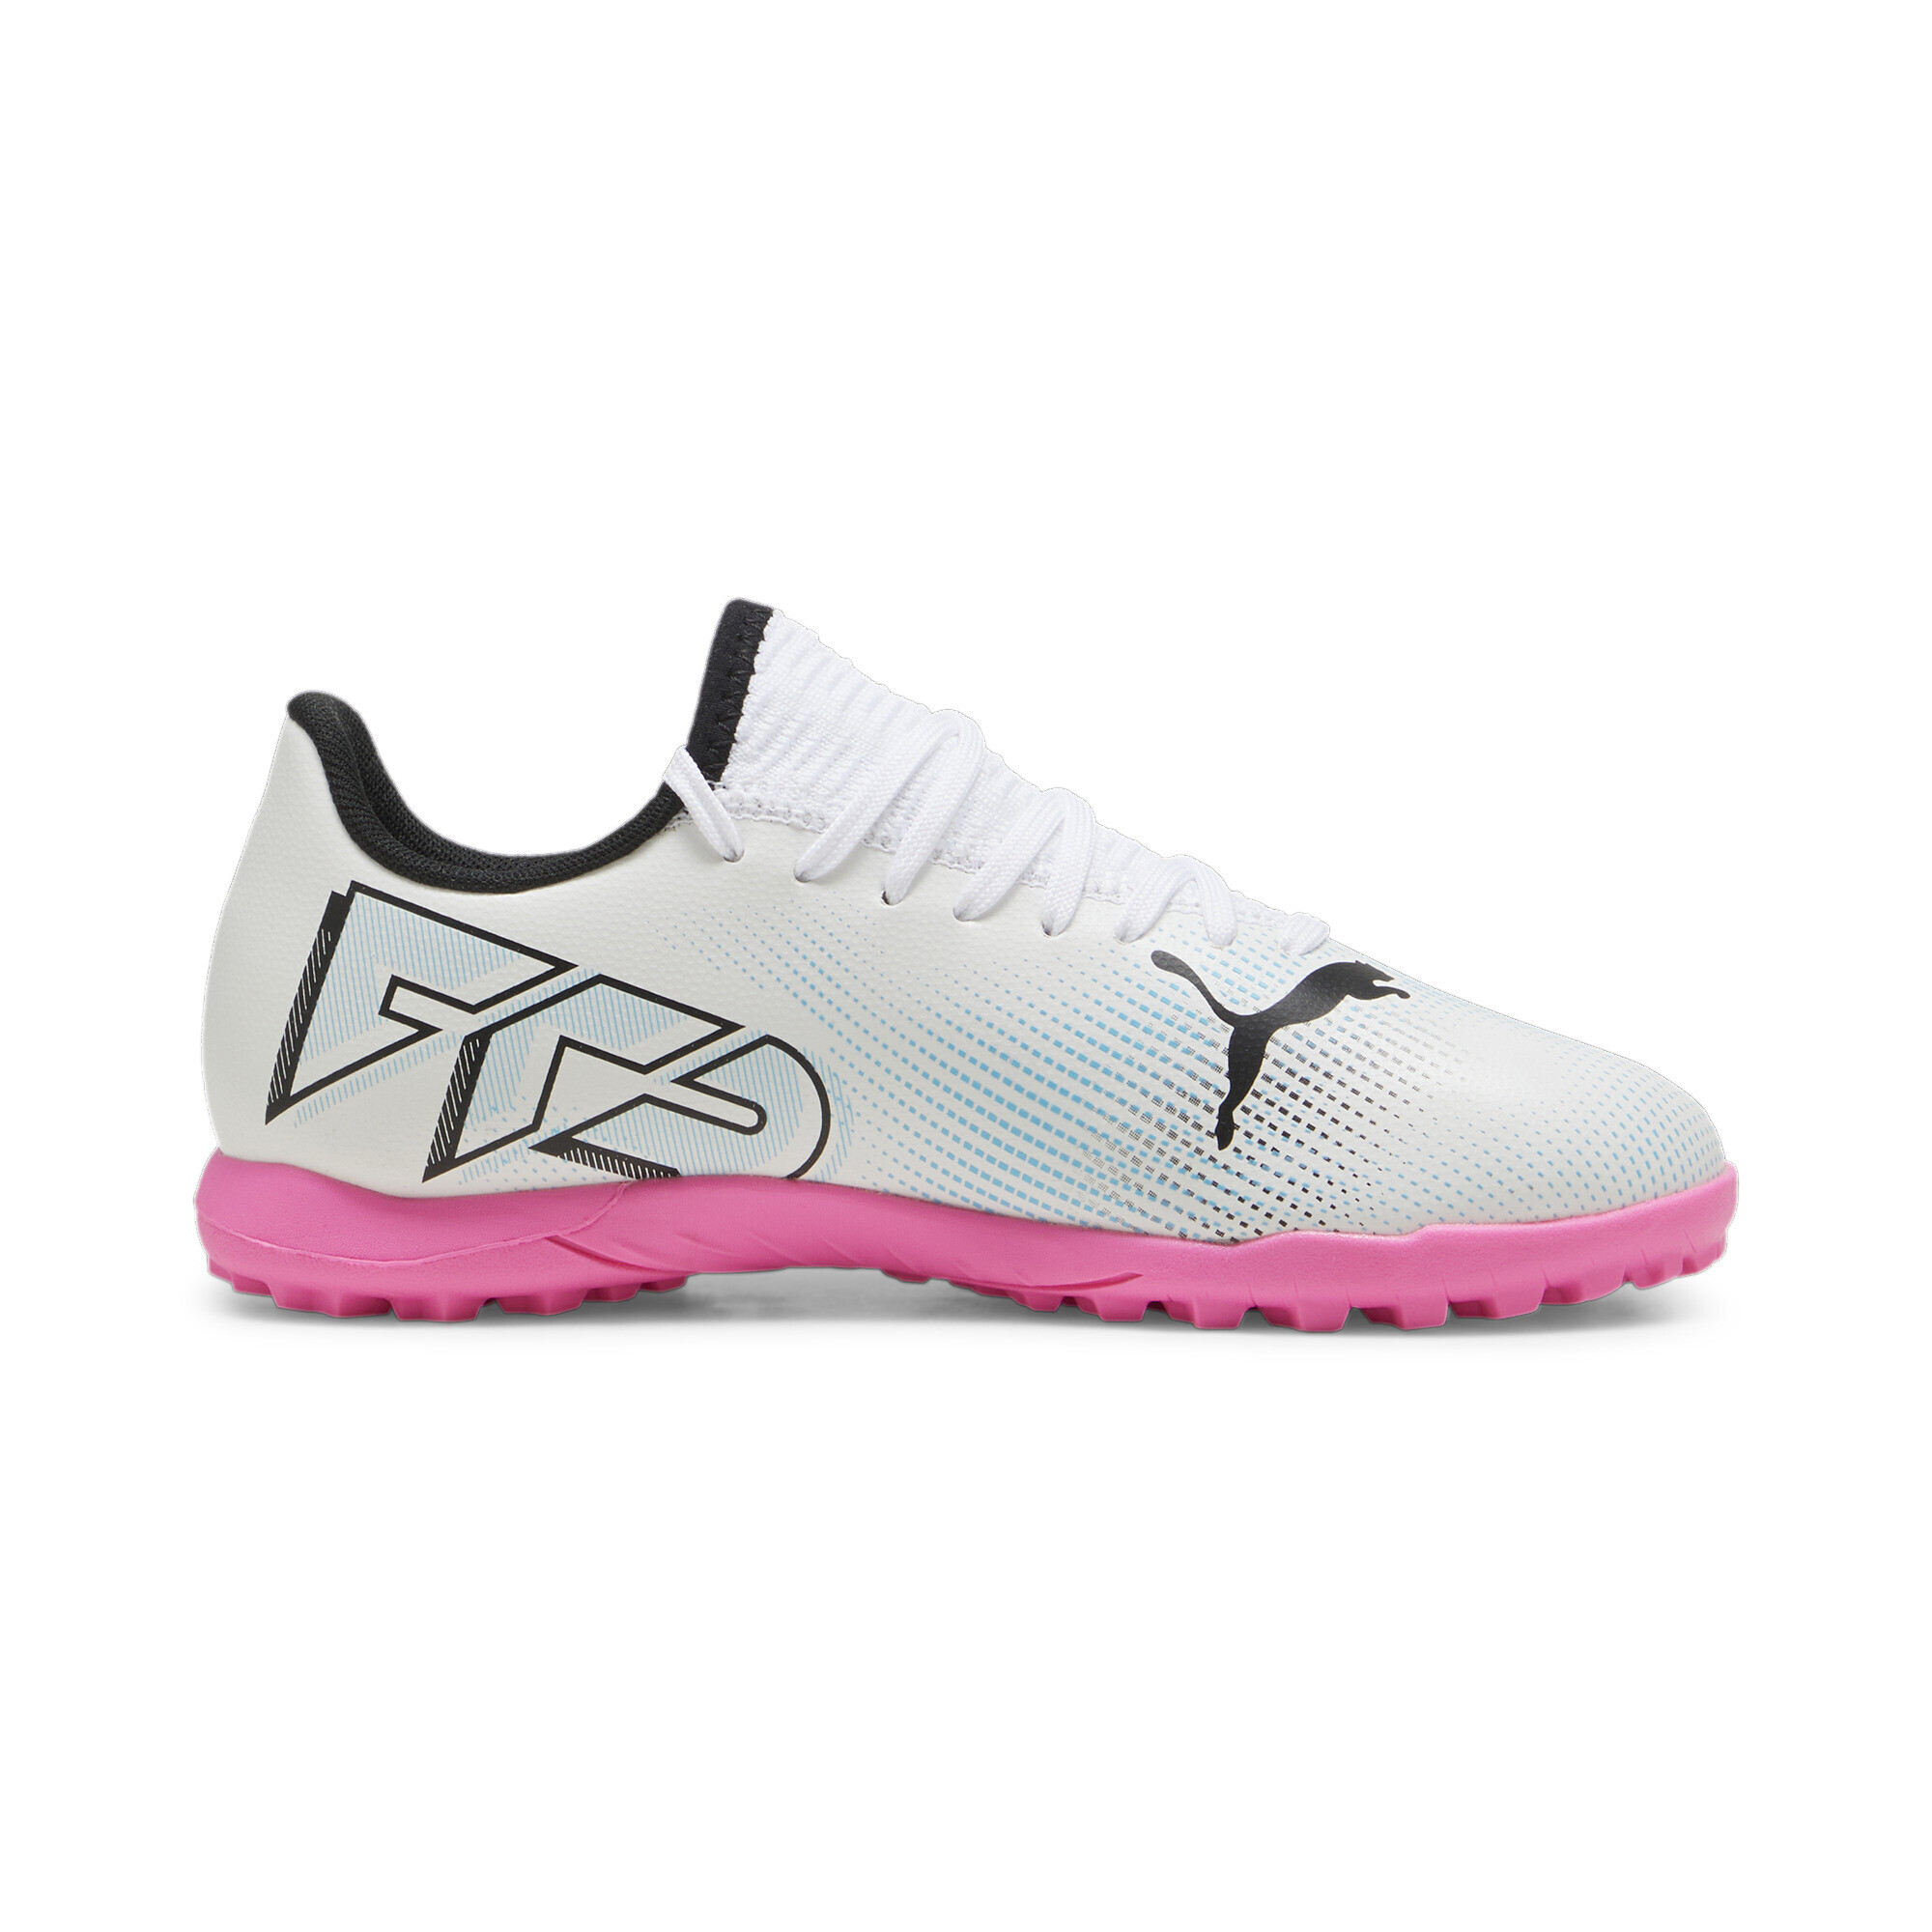 PUMA FUTURE 7 PLAY TT Youth Football Boots In White/Pink, Size EU 36